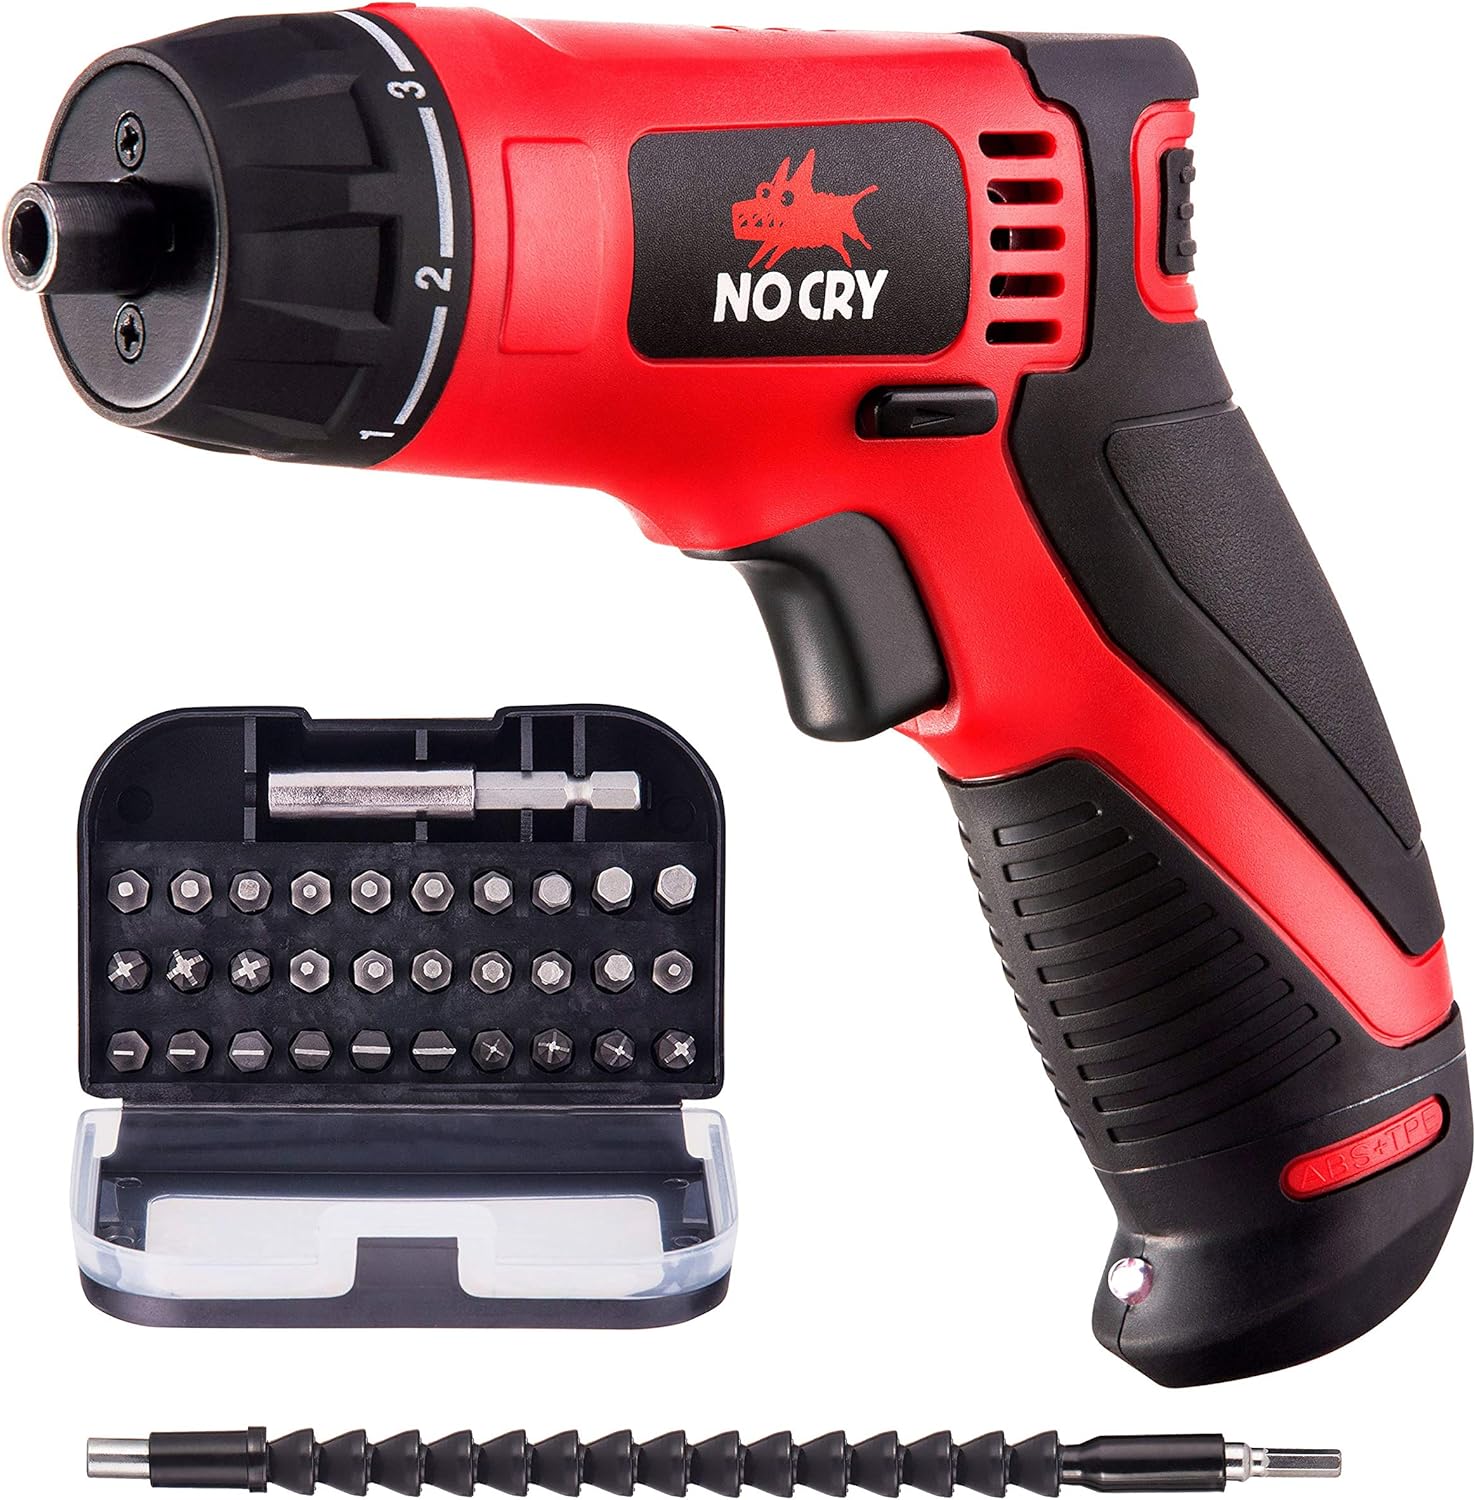 NoCry 10 N.m Cordless Electric Screwdriver - with 30 Screw Bits